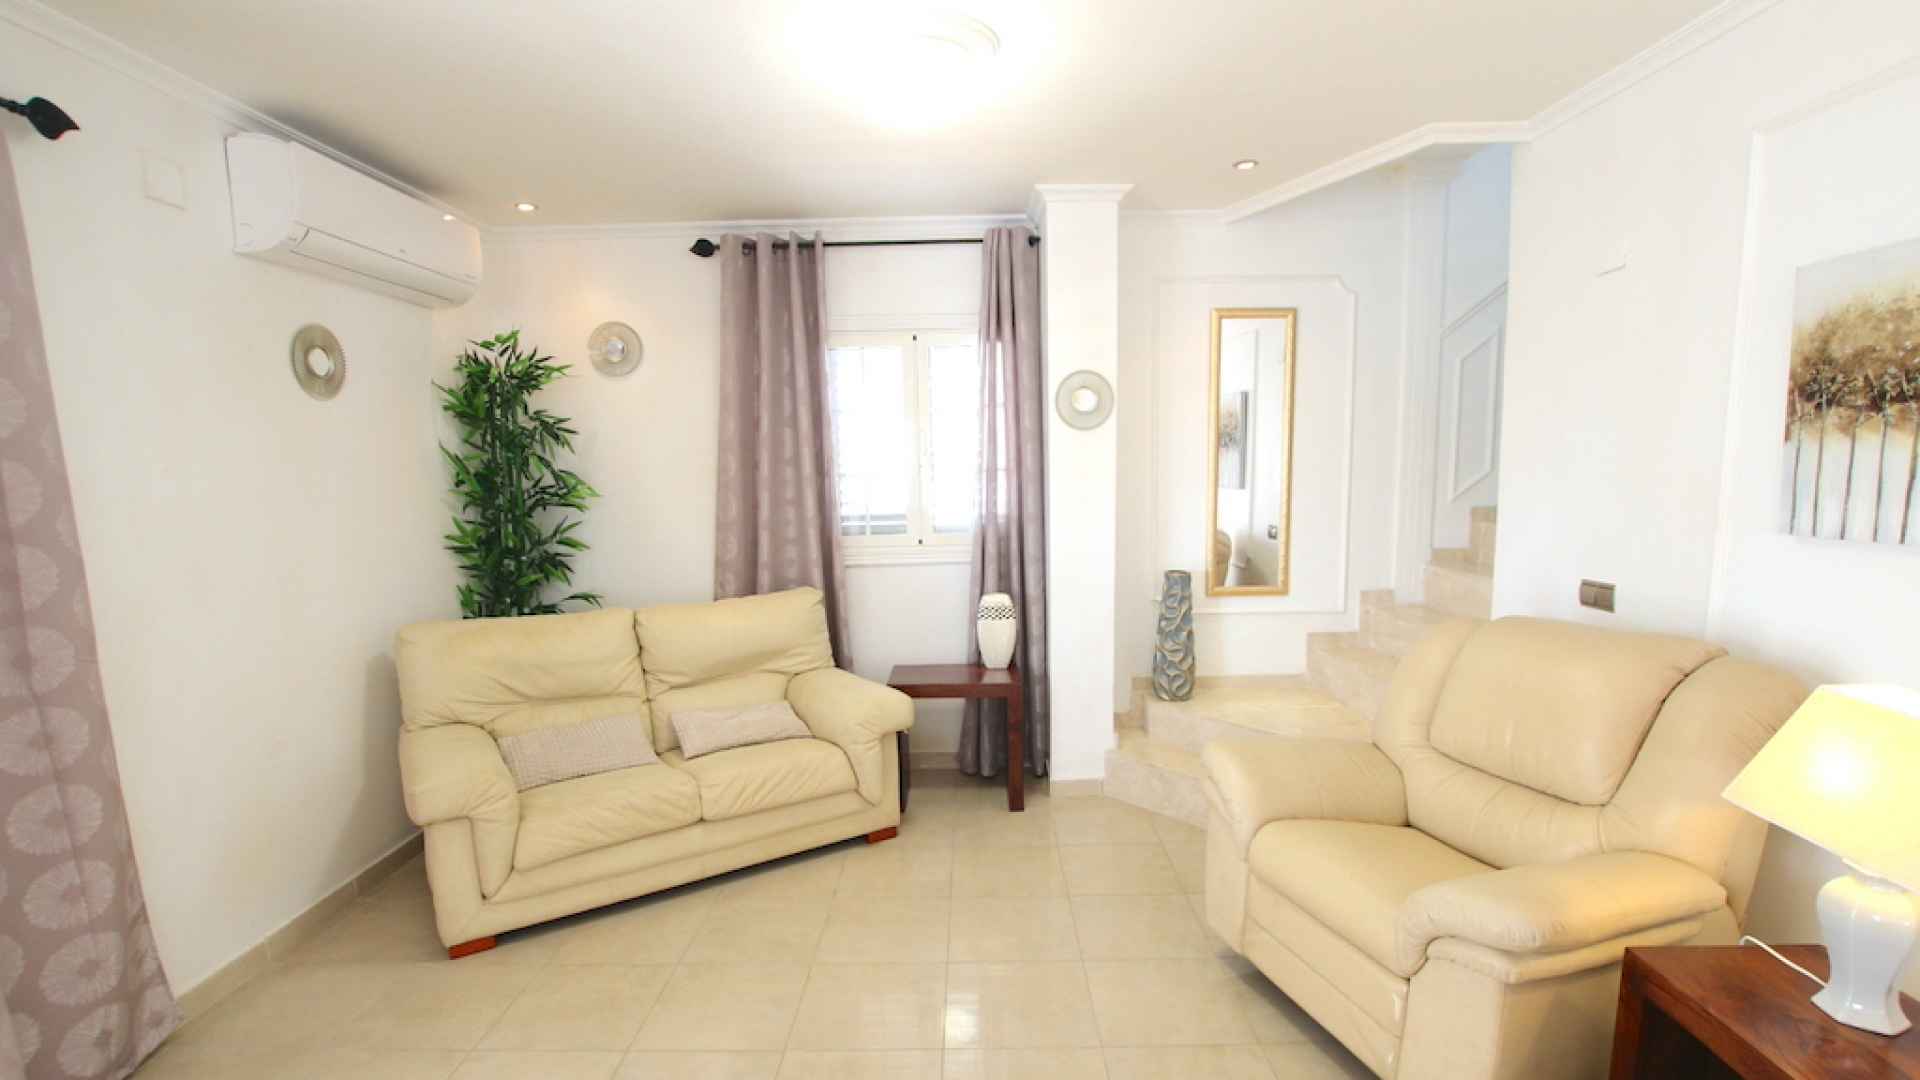 48358_expansive_4_bed_detached_villa_with_private_pool_and_garage_220224130510_img_7481